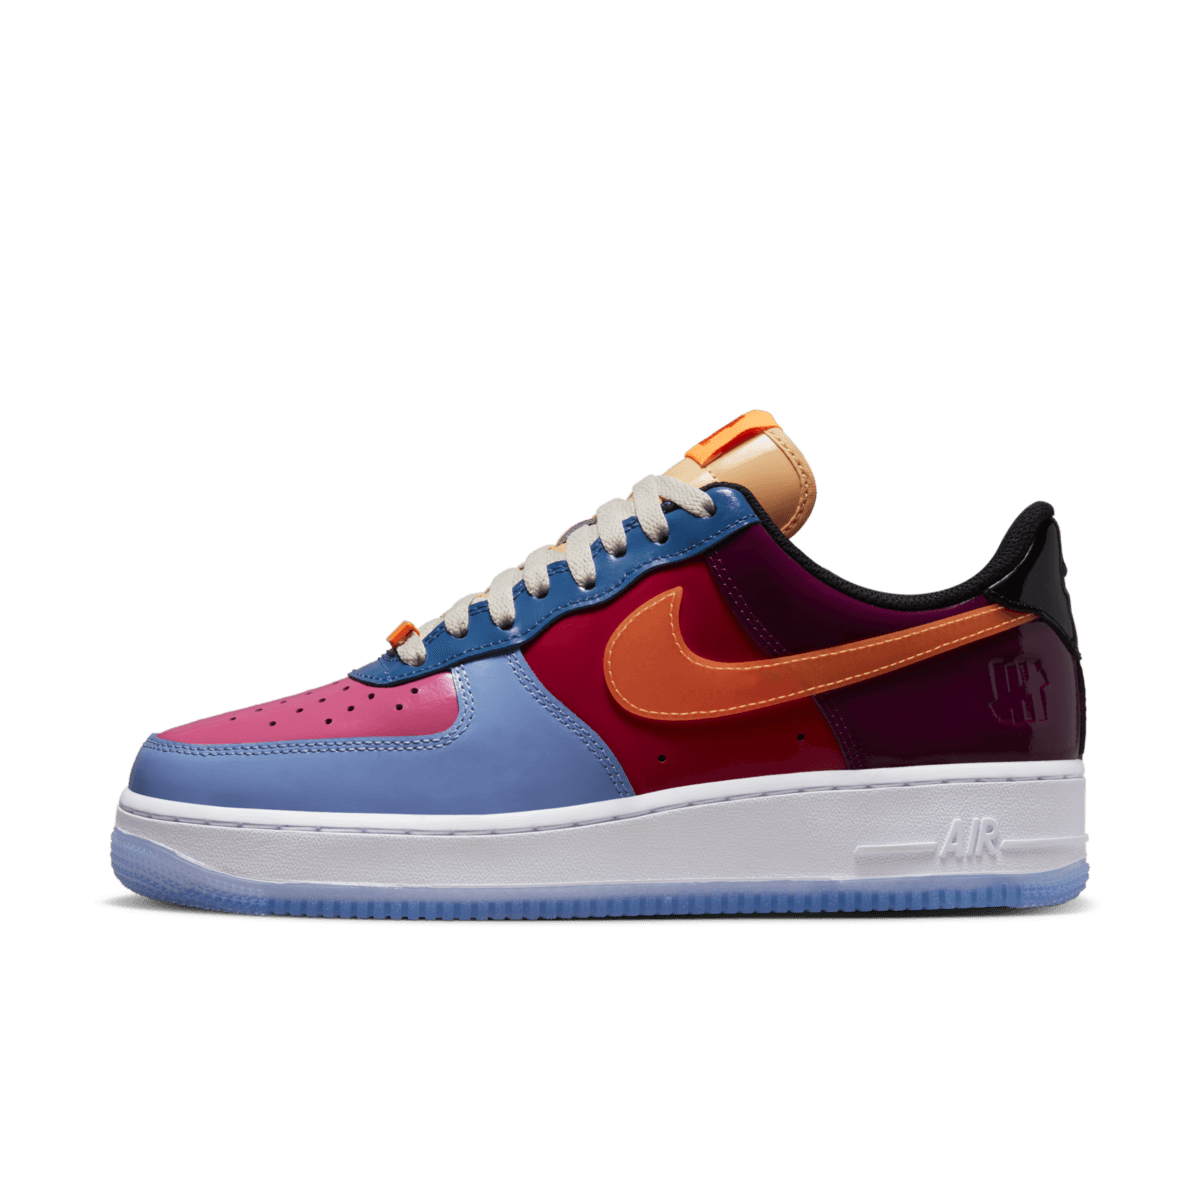 UNDEFEATED x Nike Air Force 1 Low 'Multi-Patent'